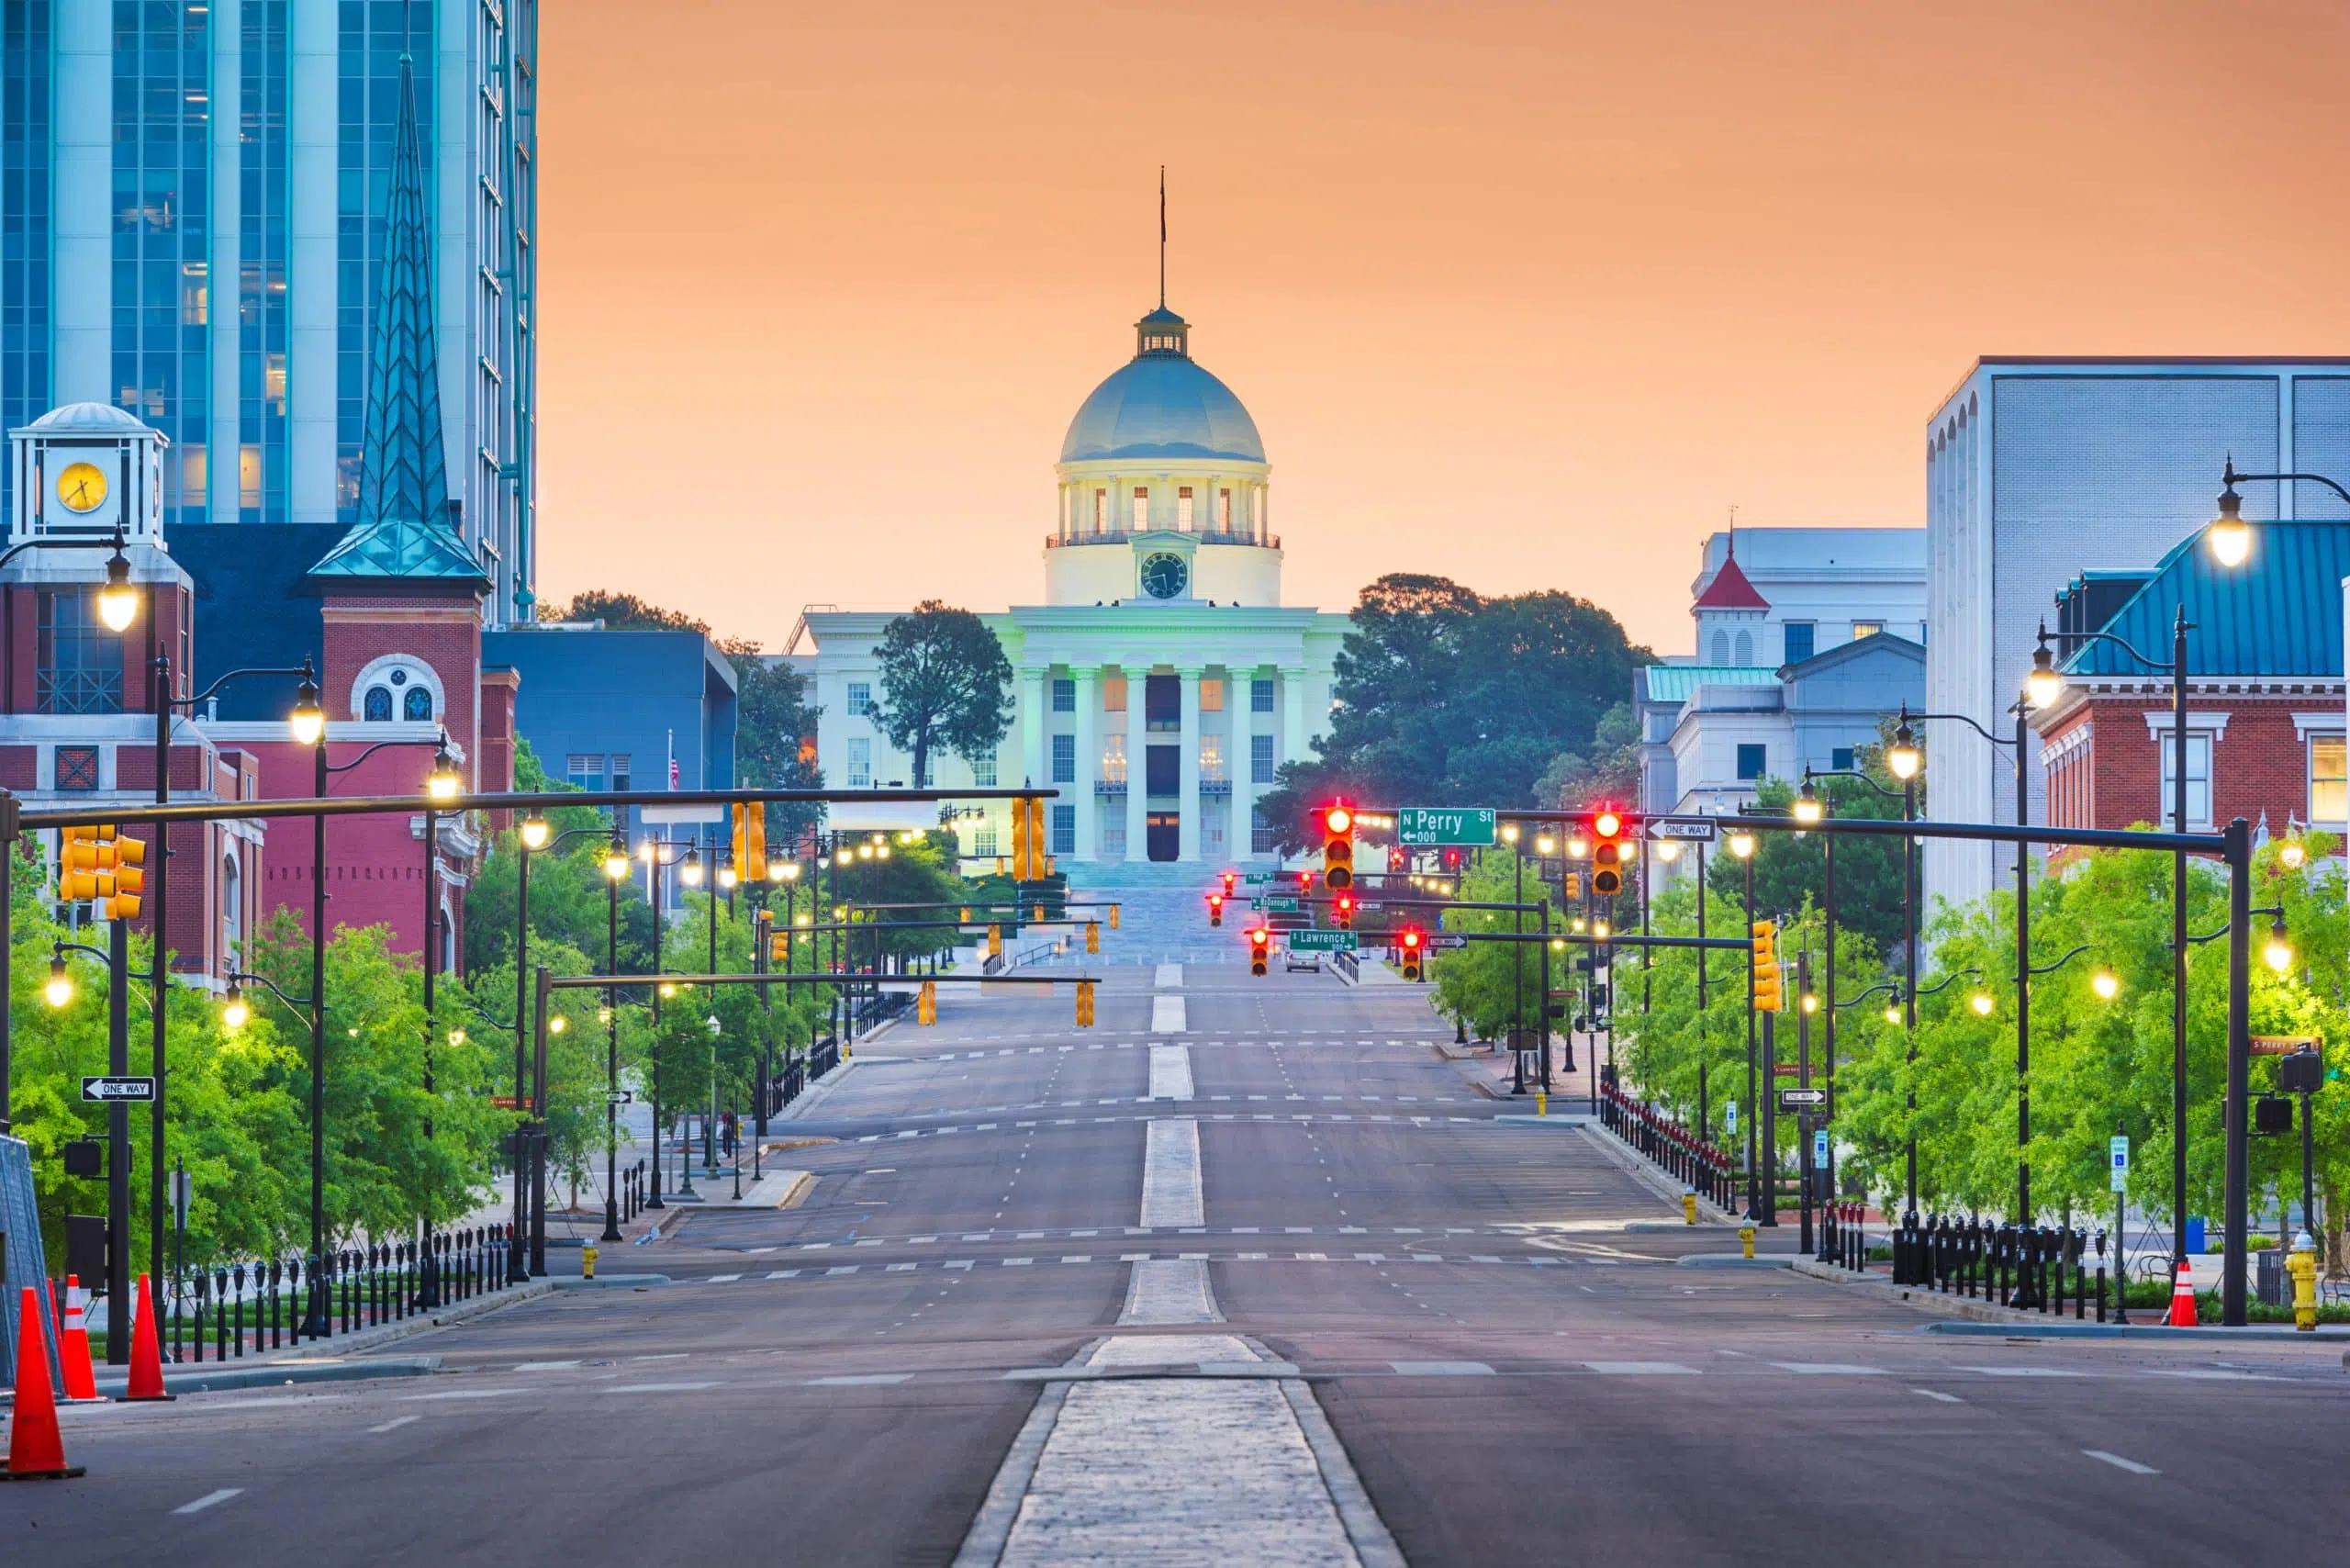 Roadway leading to the Montgomery, Alabama capitol building